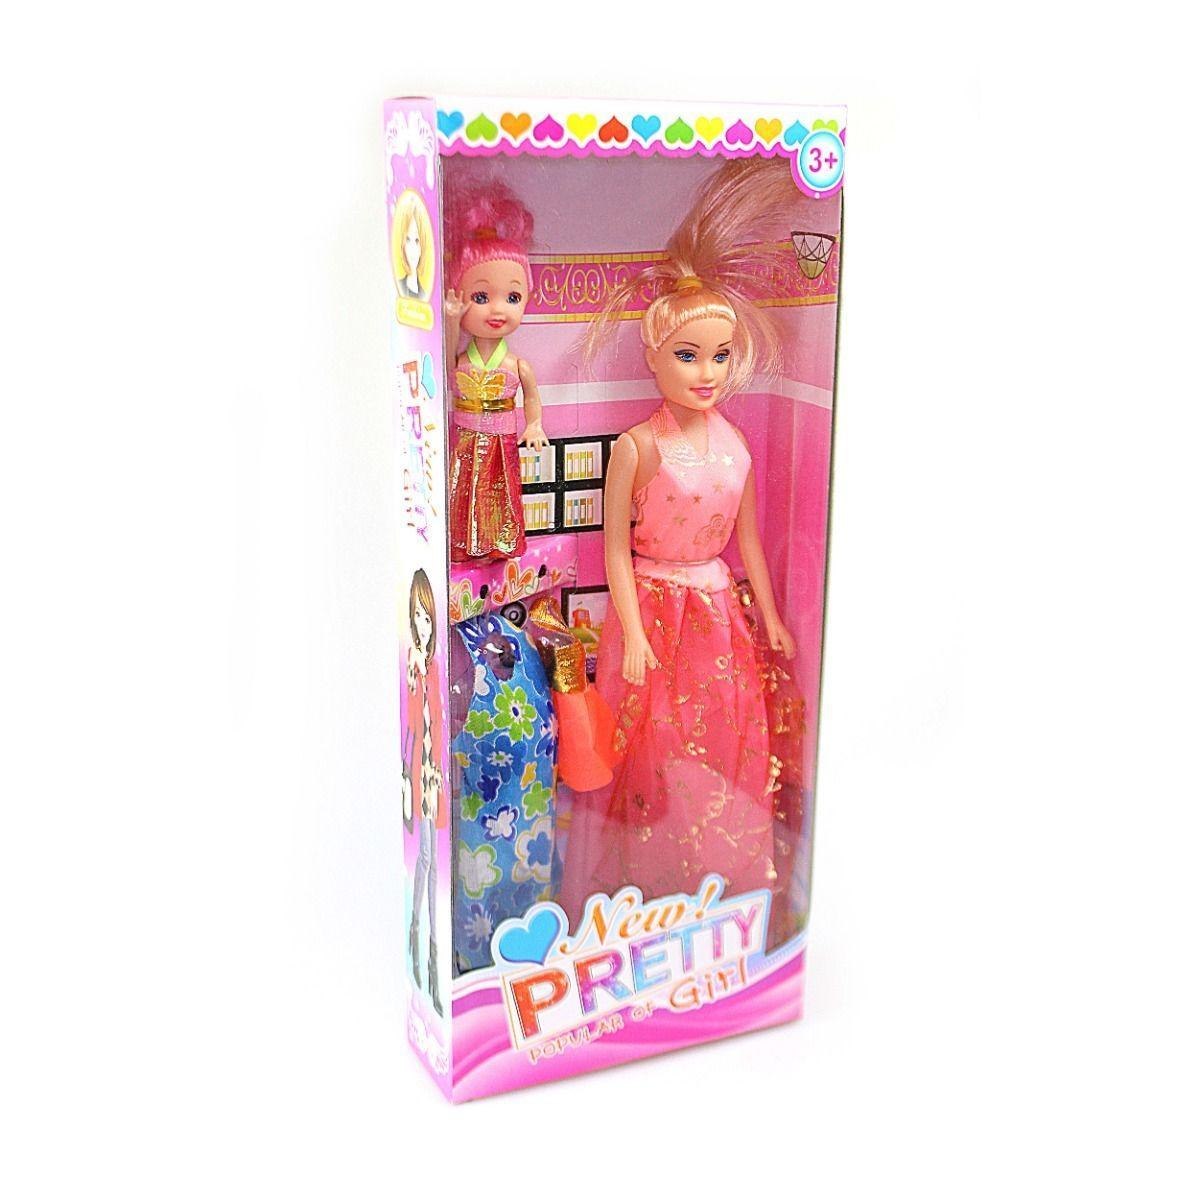 Set Of 2 Fashion Dolls Interchangeable Costumes Dress Up & Pretend Play 3+  2879 (Parcel Rate)